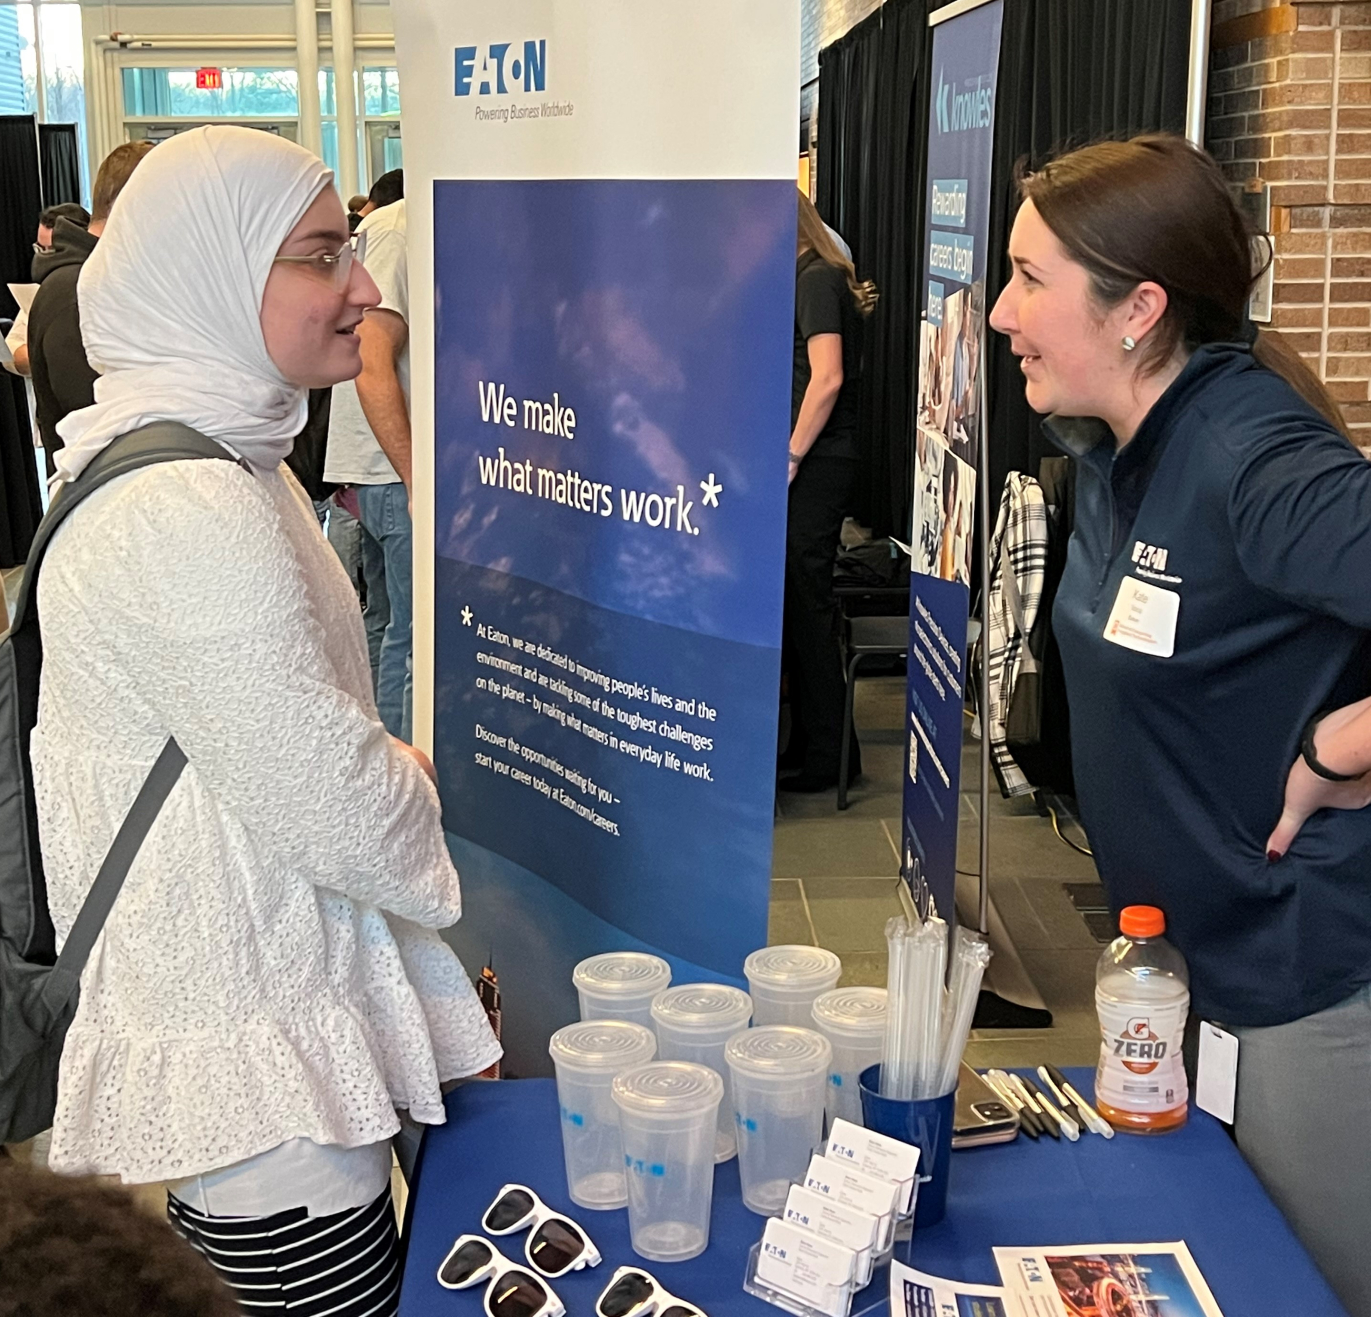 Computer Science major Yasmine Chatila (left) came to the Career Fair looking for internship and employment opportunities.